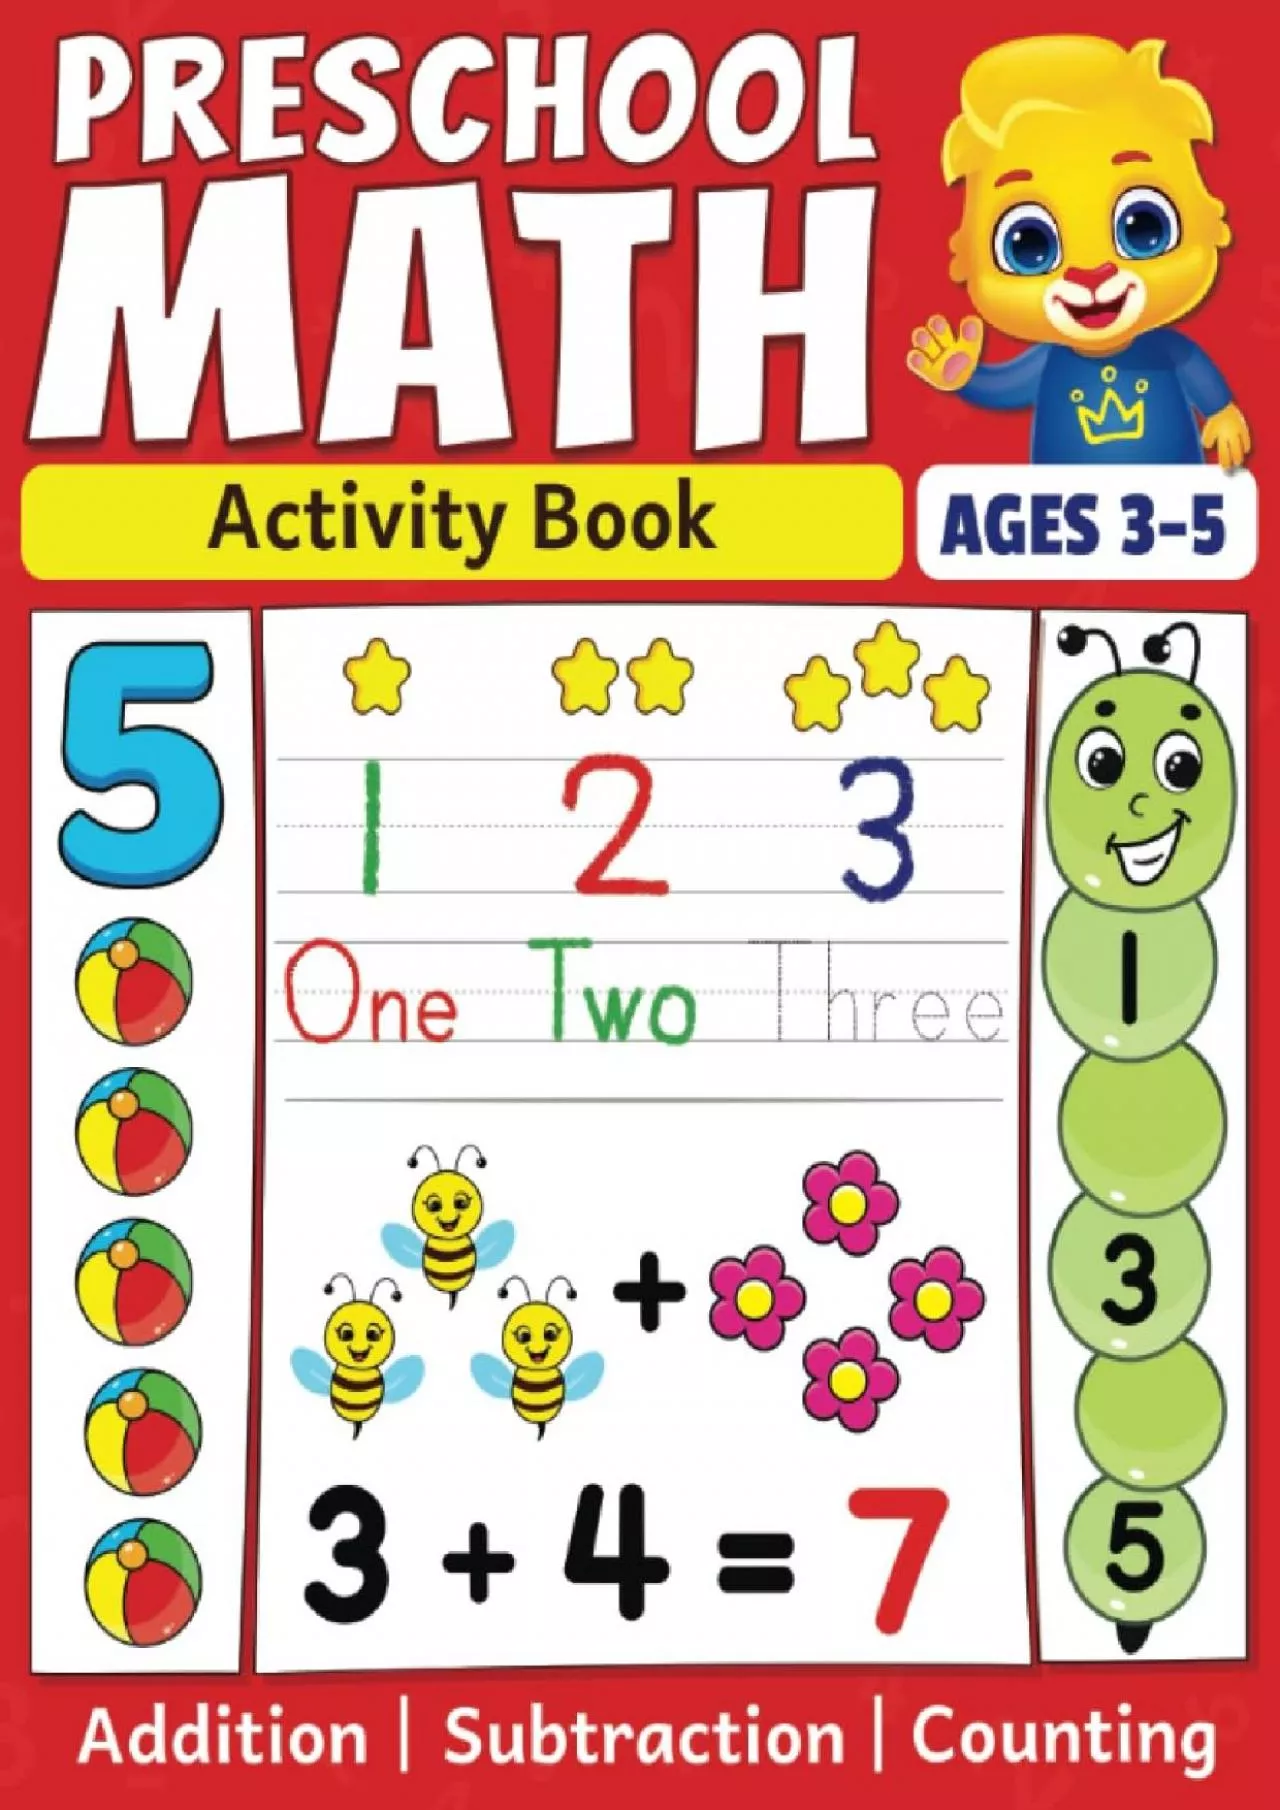 [DOWNLOAD] Preschool Math Activity Book: Learn to Count, Number Tracing, Addition and